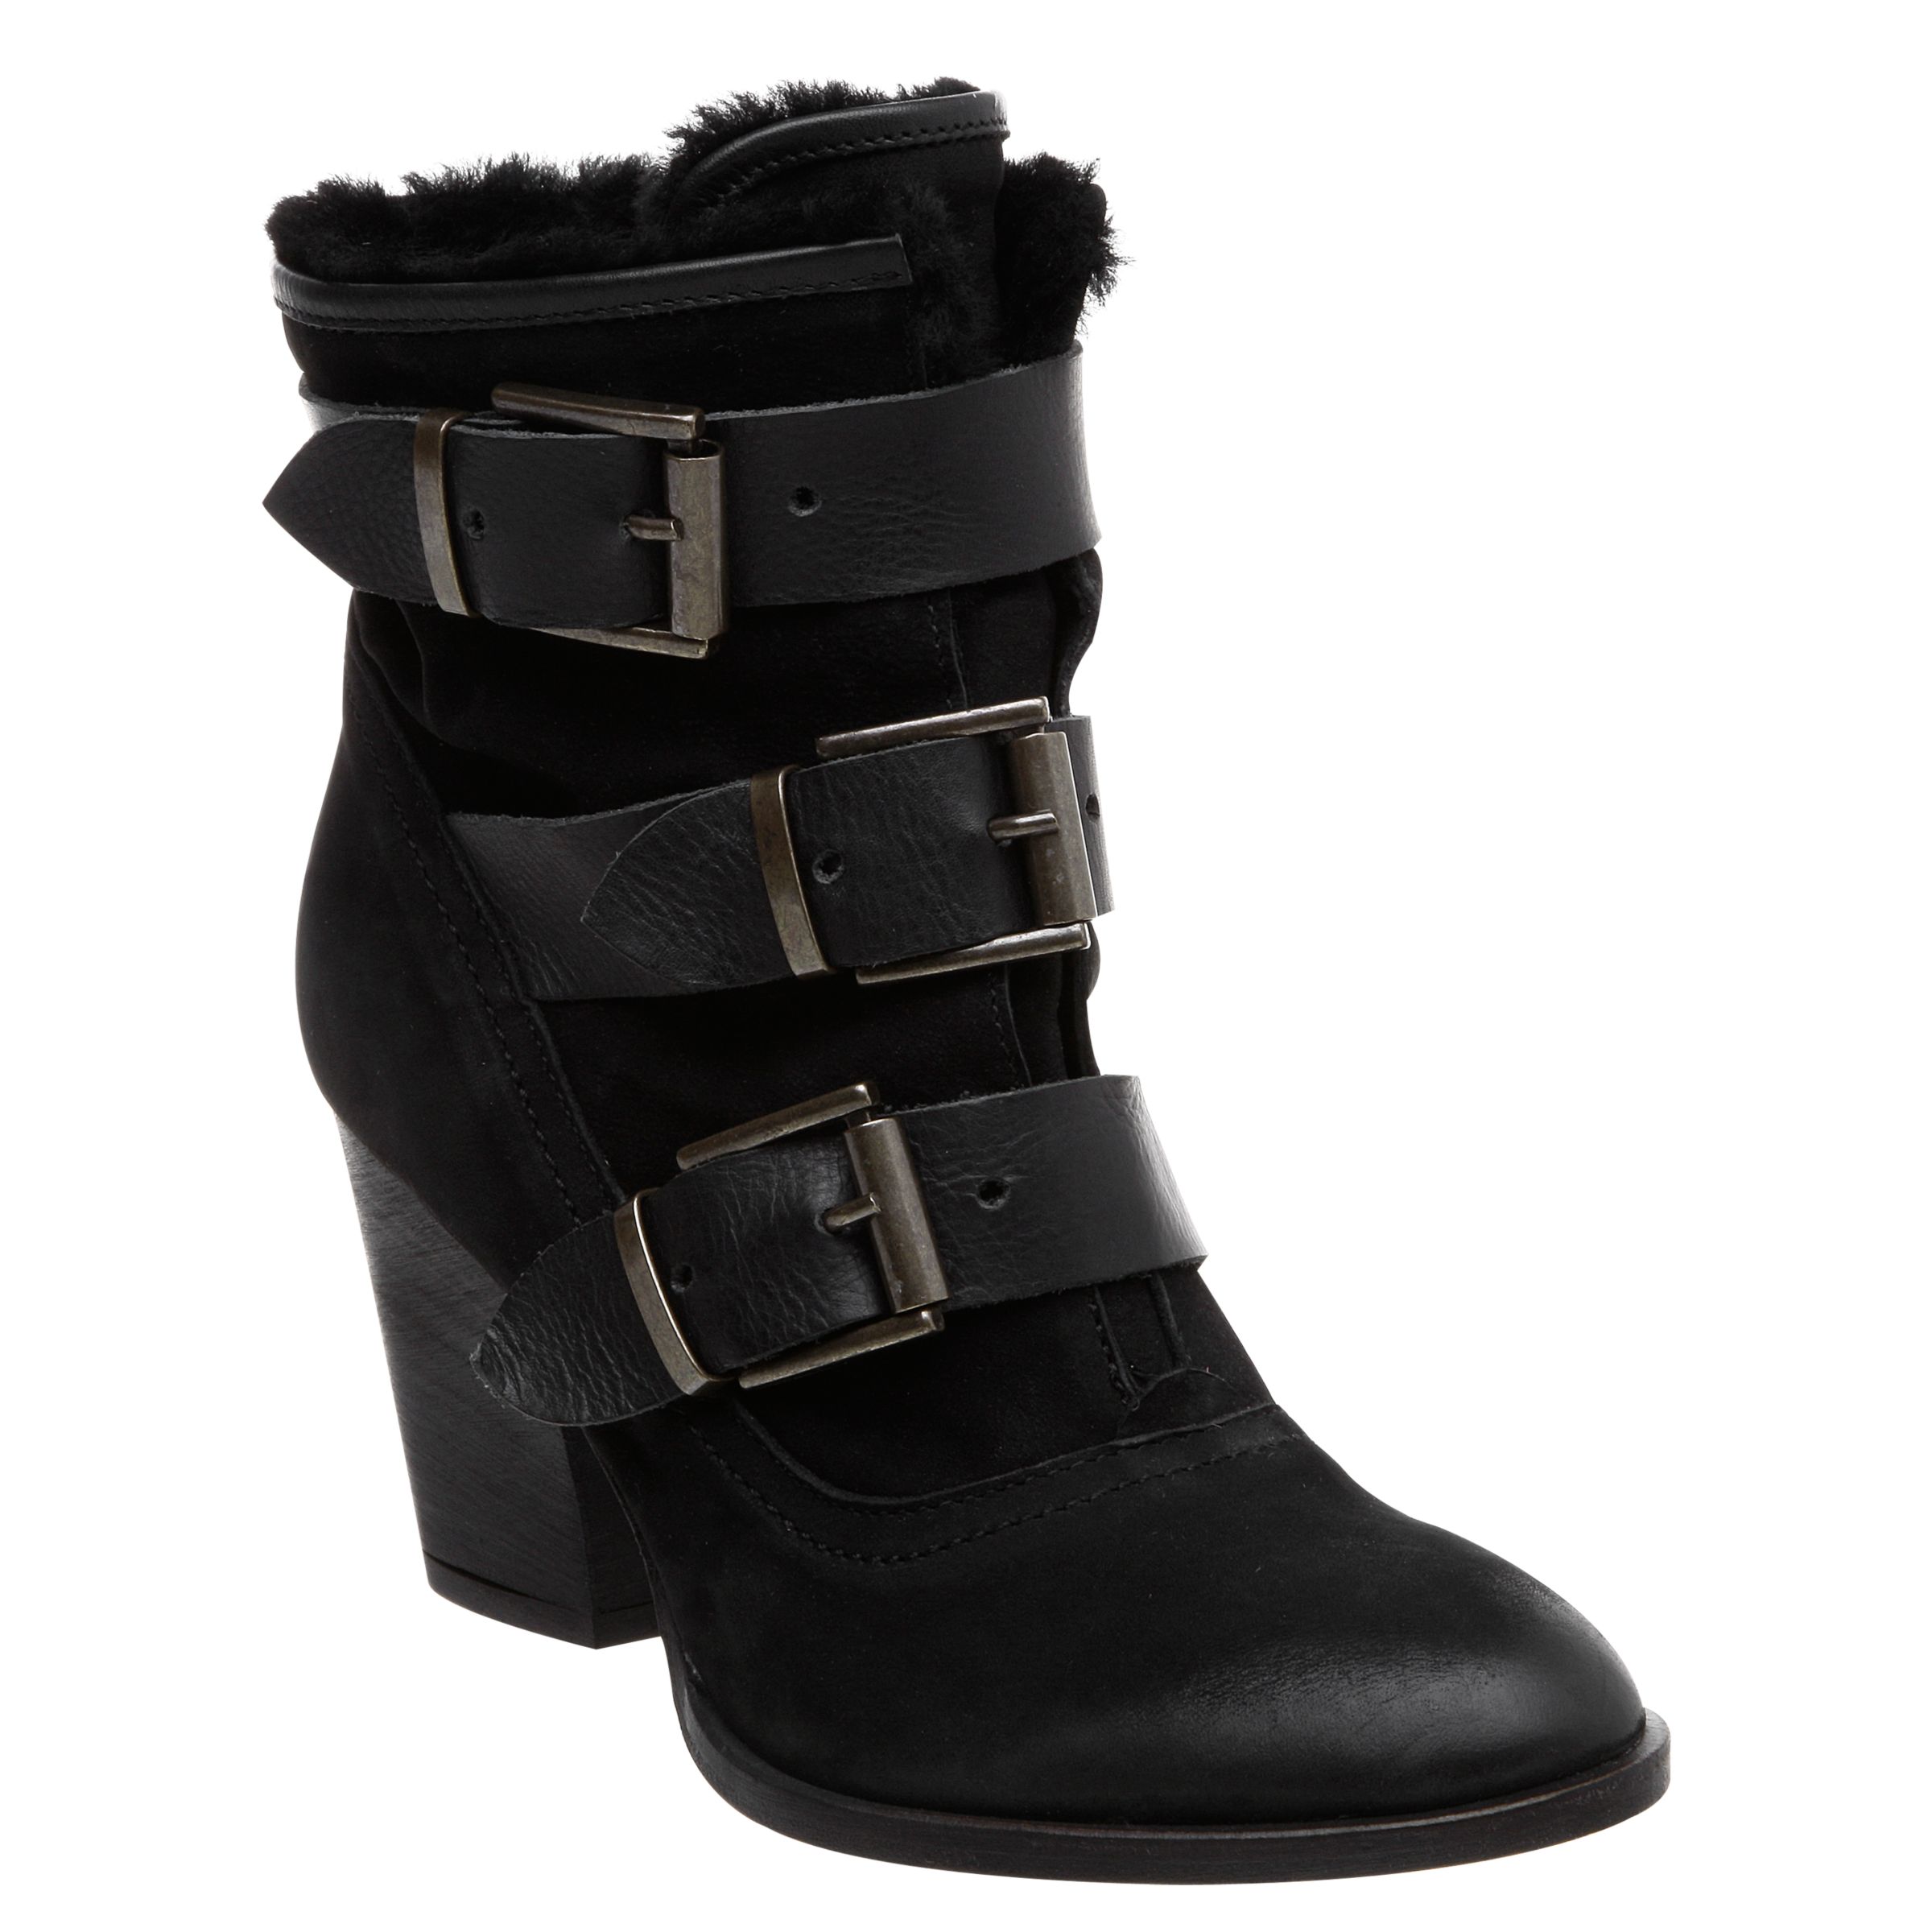 Pied A Terre O'Hanian Multi Strap Ankle Boots, Black at John Lewis